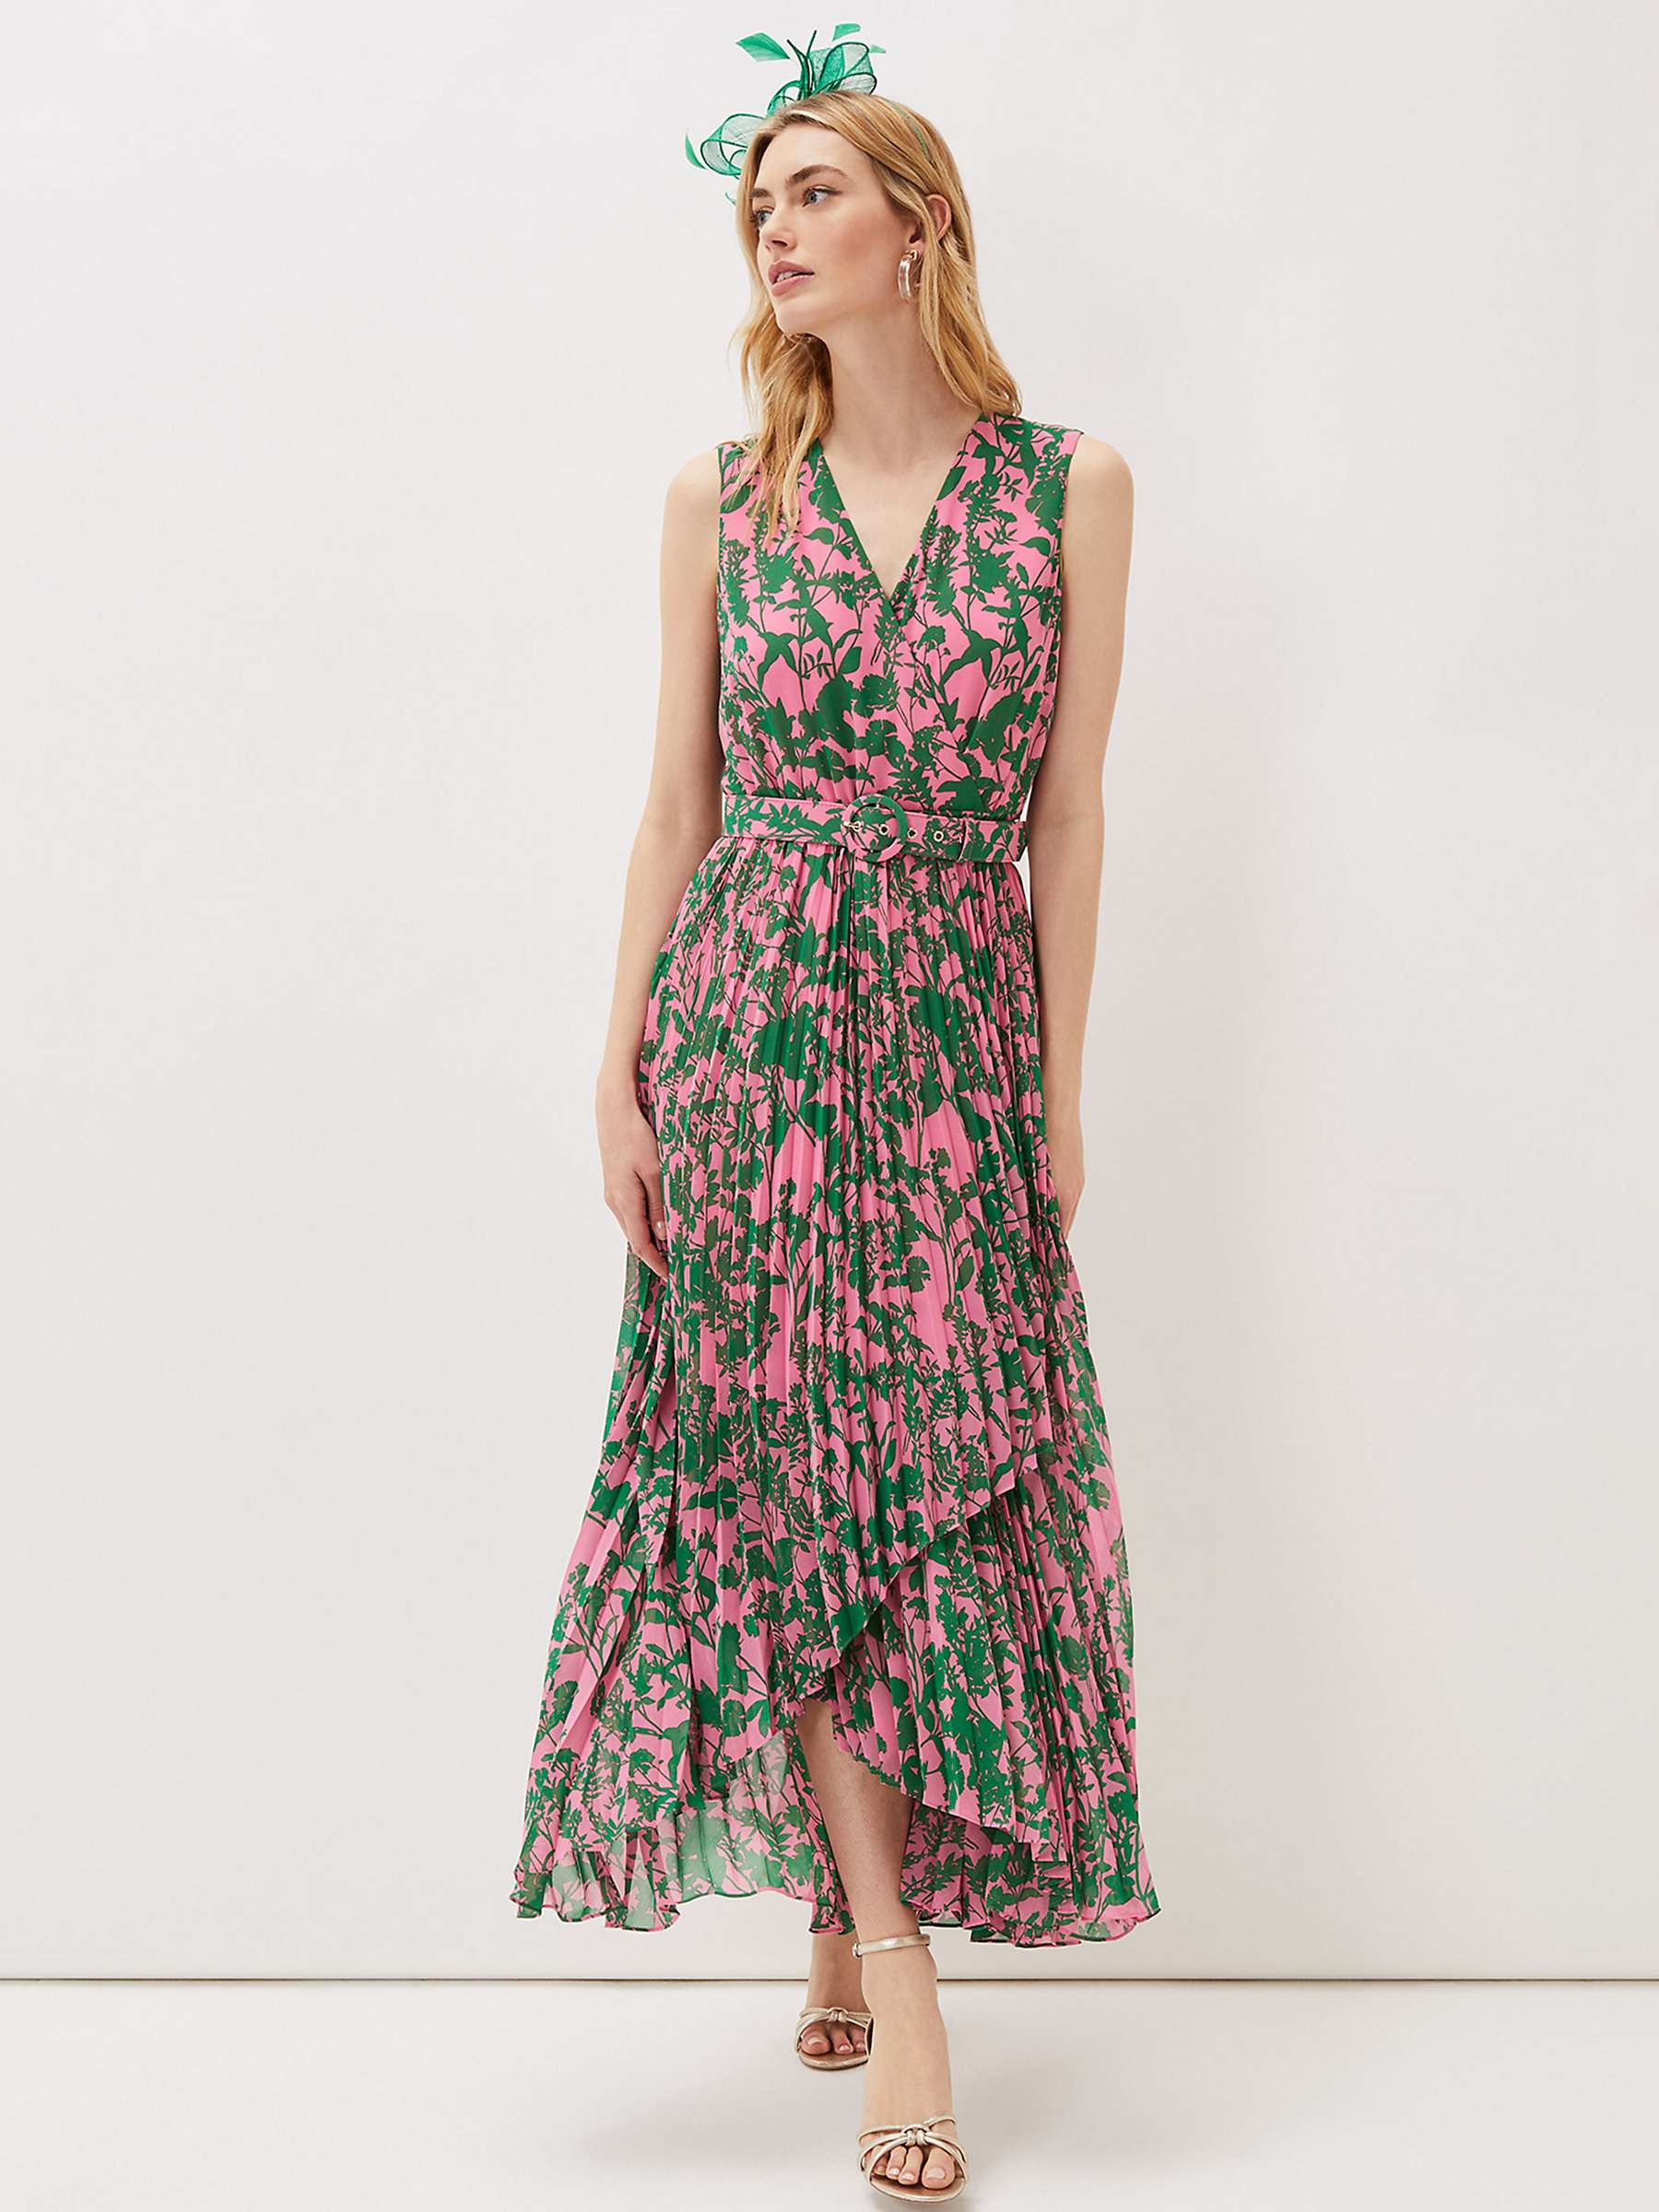 Buy Phase Eight Brianna Pleated Maxi Dress, Pink/Green Online at johnlewis.com